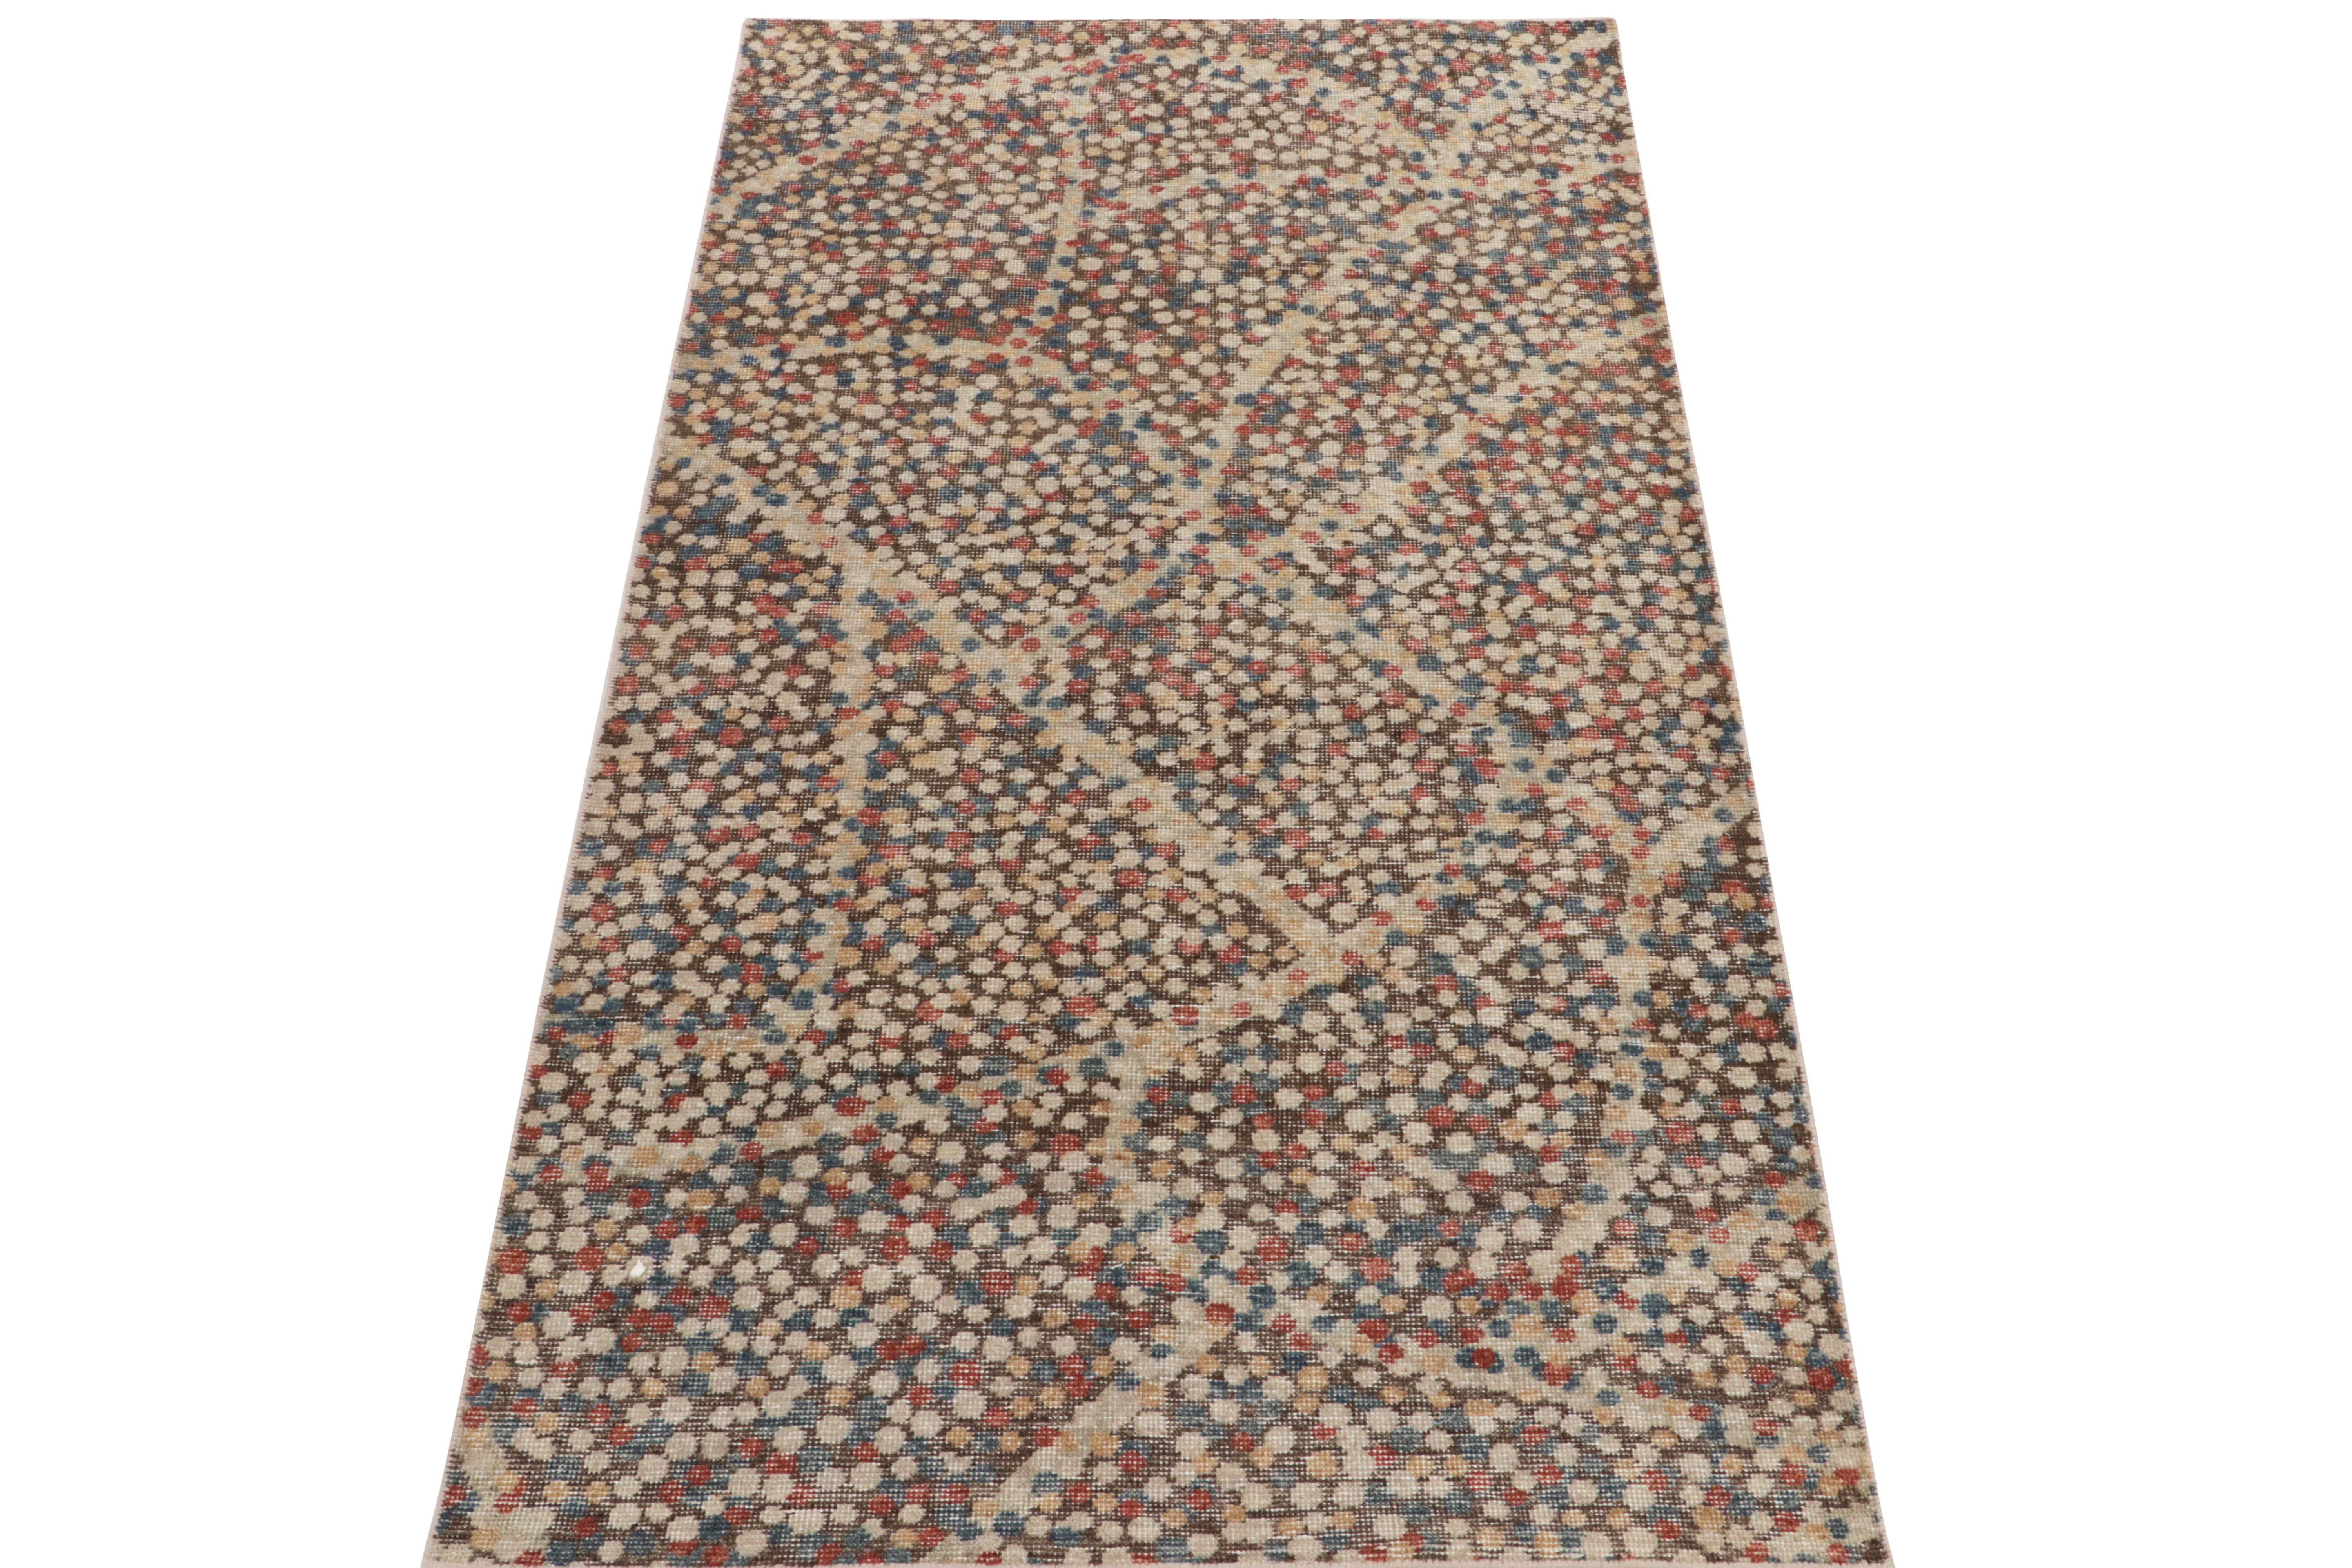 From the Homage Collection by Rug & Kilim’s, a 4 x 8 modern take on distressed style marrying abstract inspiration with a shabby-chic texture. The vision enjoys hues of red, deep blue & beige to off-white dots on a chocolate brown backdrop for a